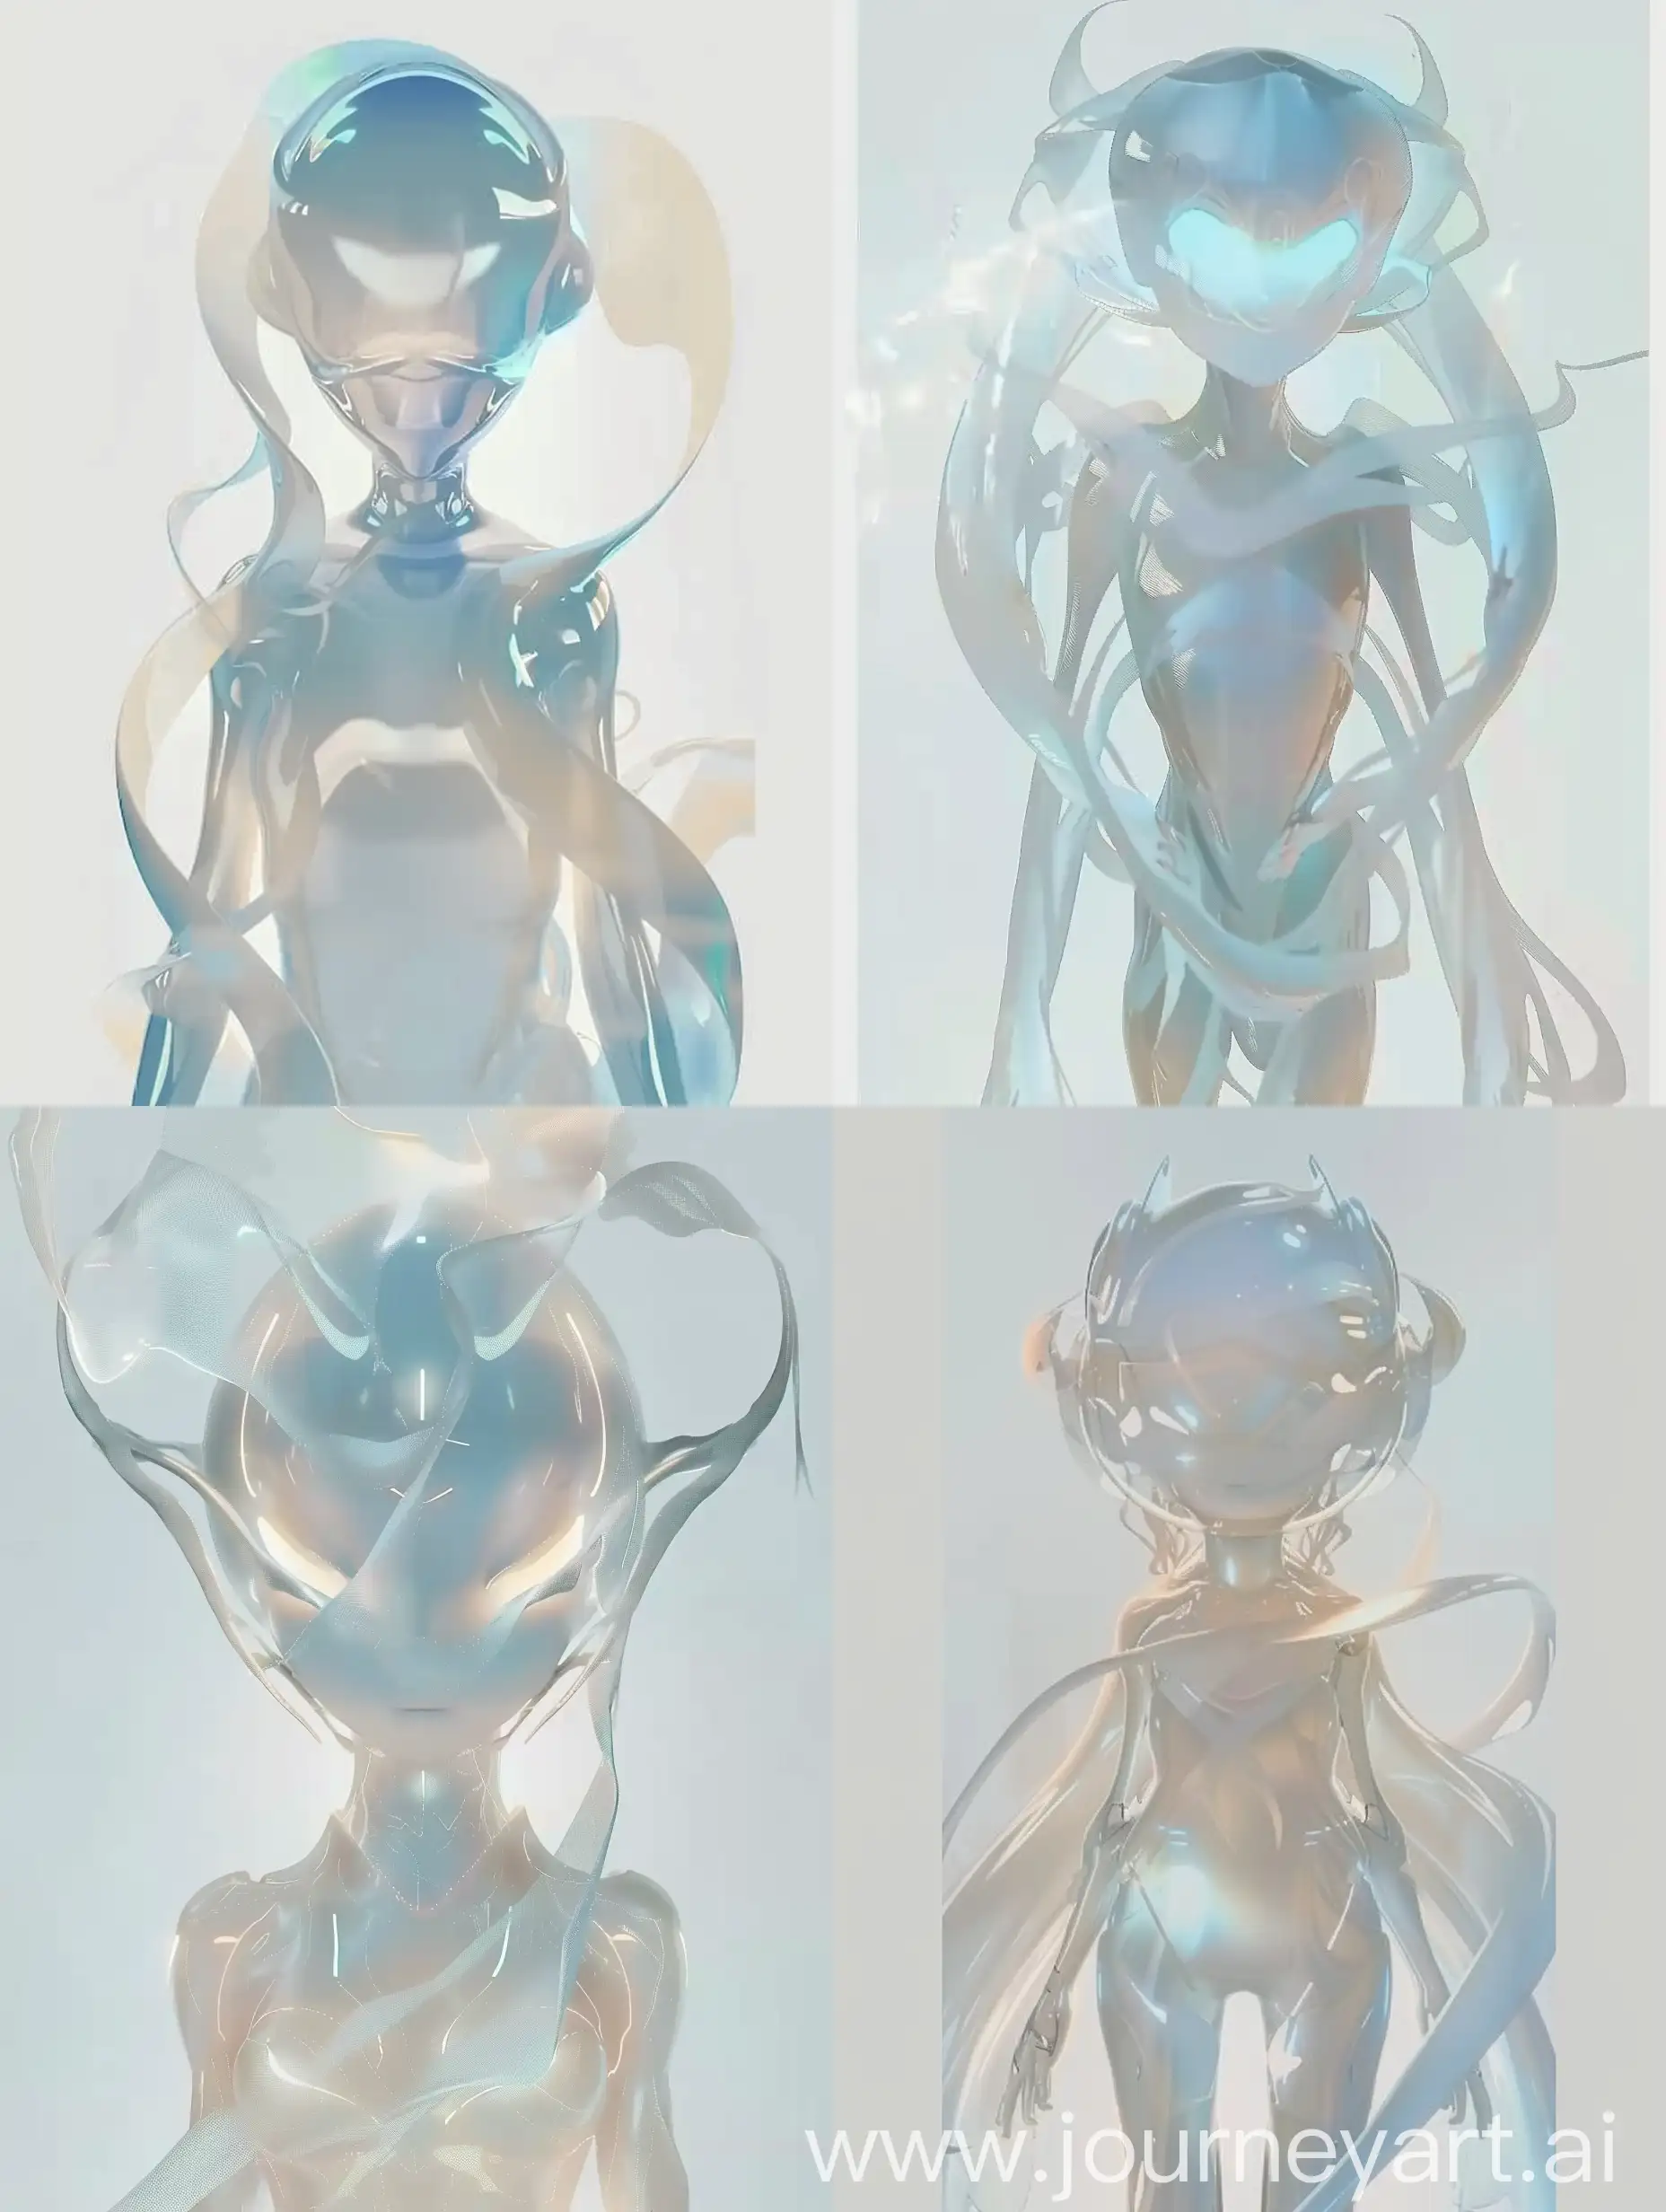 Create an illustration featuring a futuristic, ethereal character with a soft, glowing appearance. The character should have a smooth, metallic surface and delicate, flowing lines that give a sense of otherworldly elegance. Incorporate elements of bioluminescence and a muted color palette, primarily in shades of white, blue, and soft pastels. The design should evoke a feeling of serenity and mystery, with a minimalist background to emphasize the character’s intricate details and luminous quality.